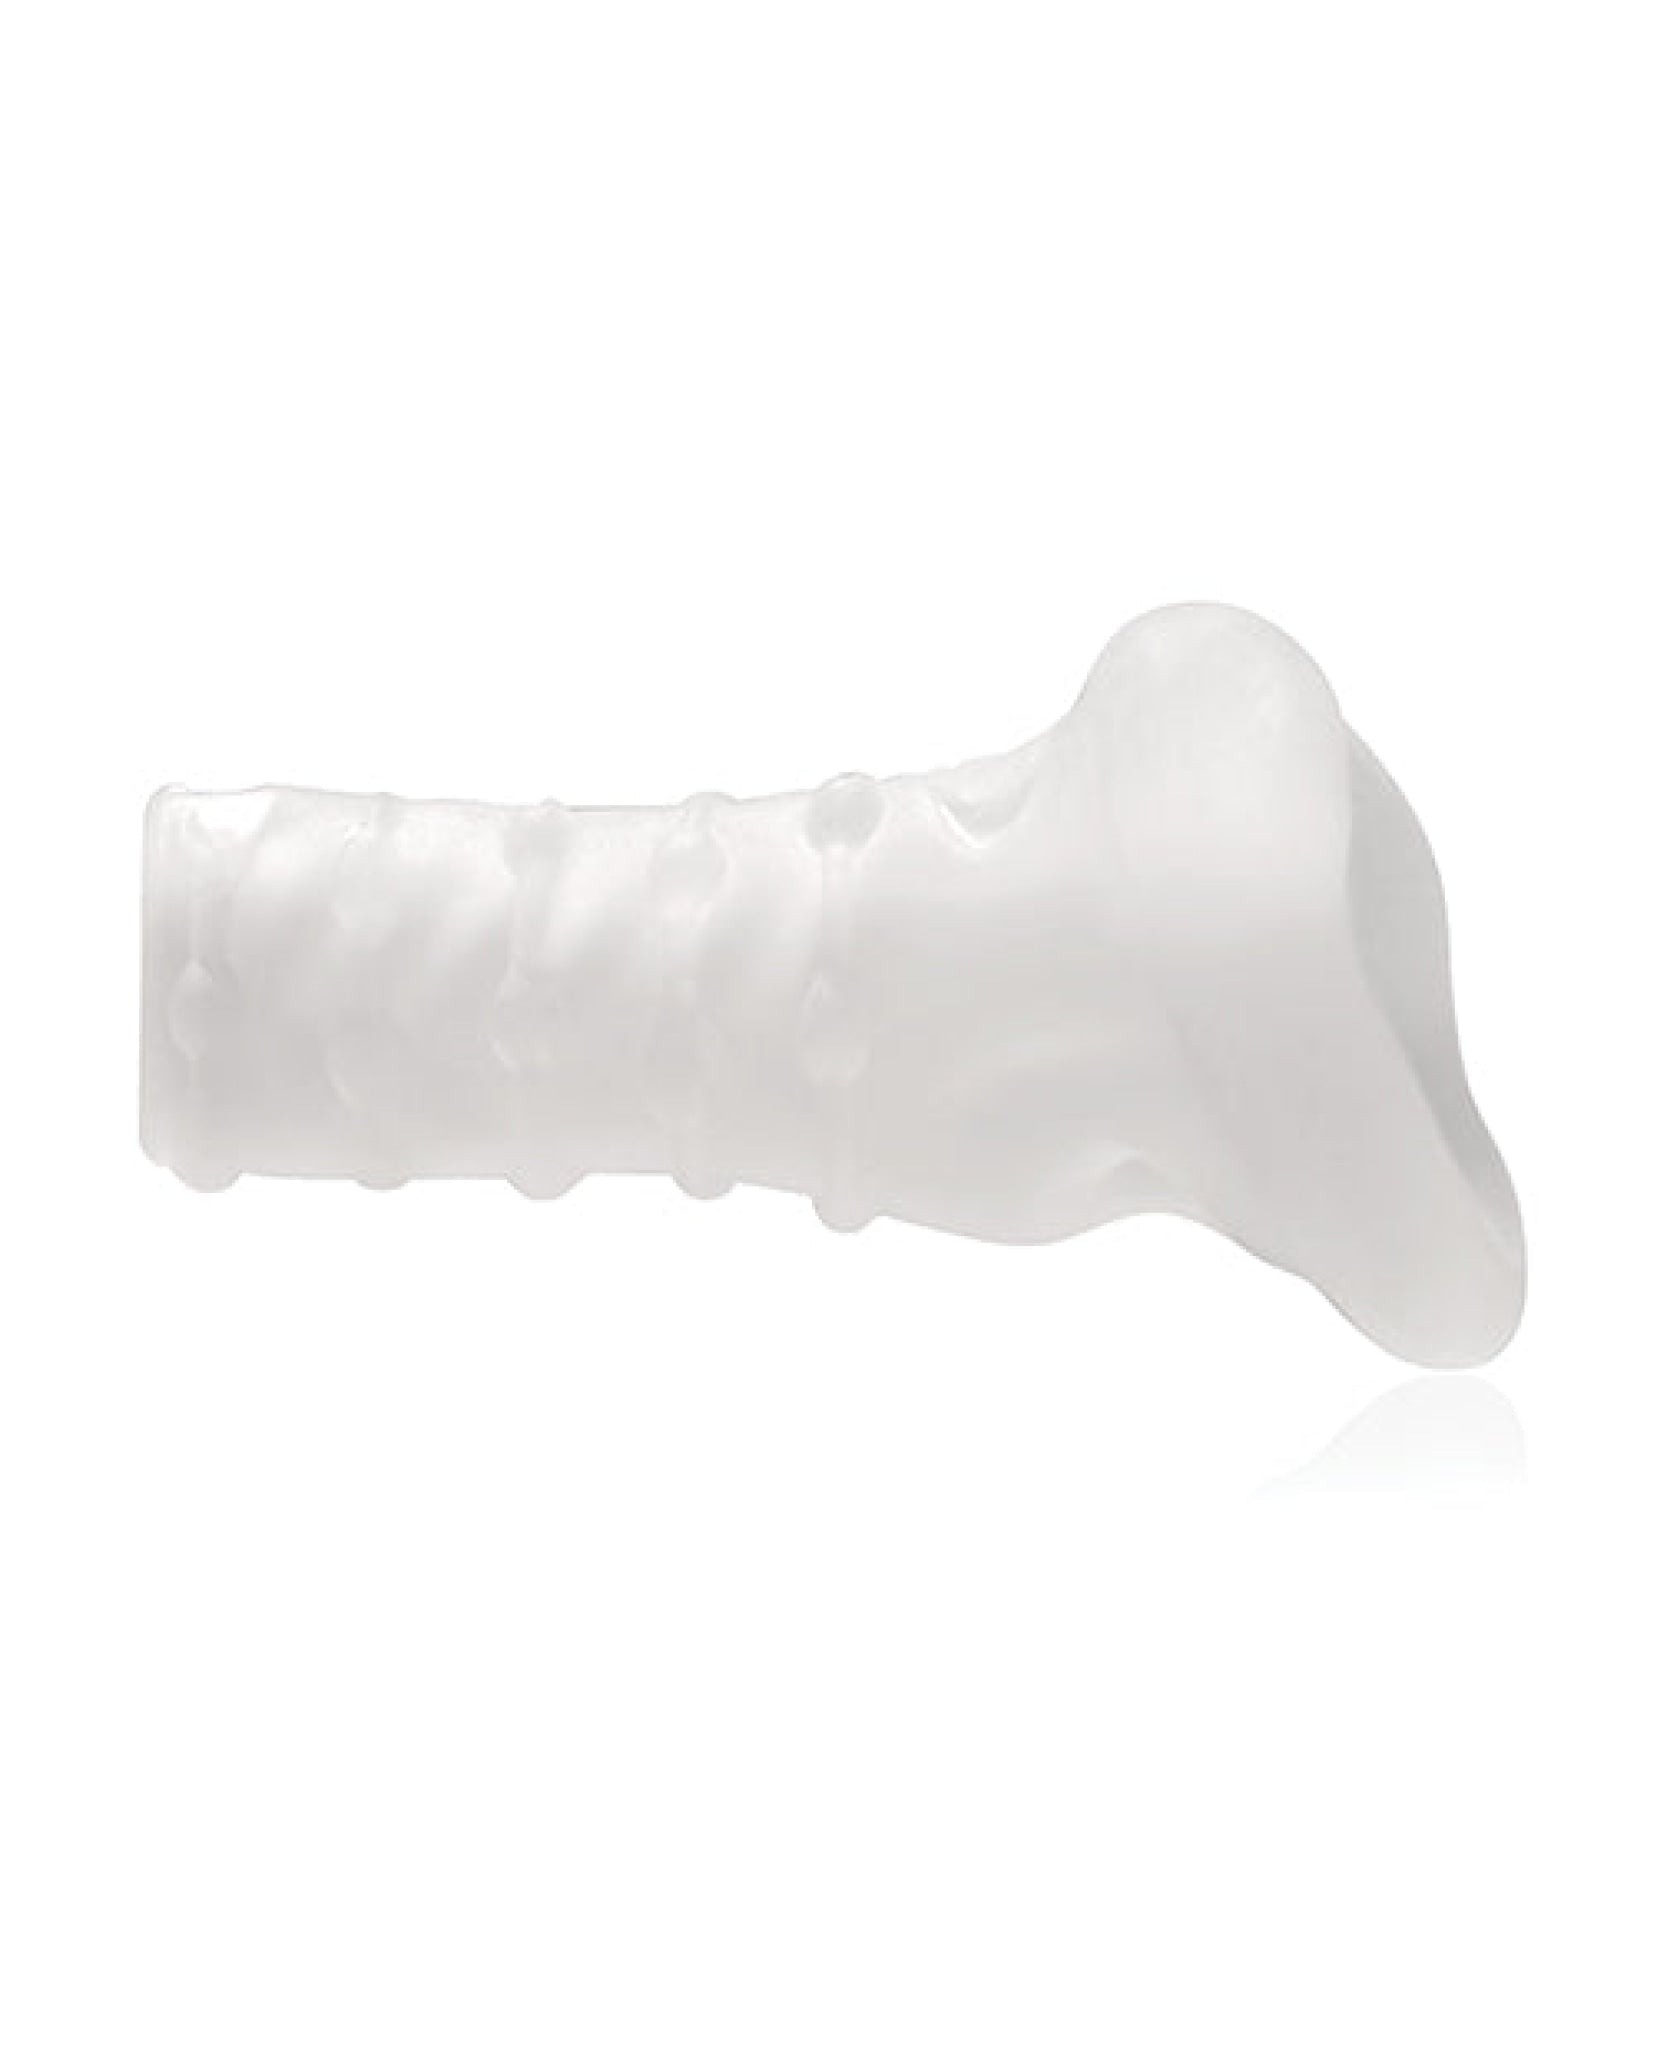 Xplay Gear The Breeder Sleeve 4.0 Clear Perfect Fit